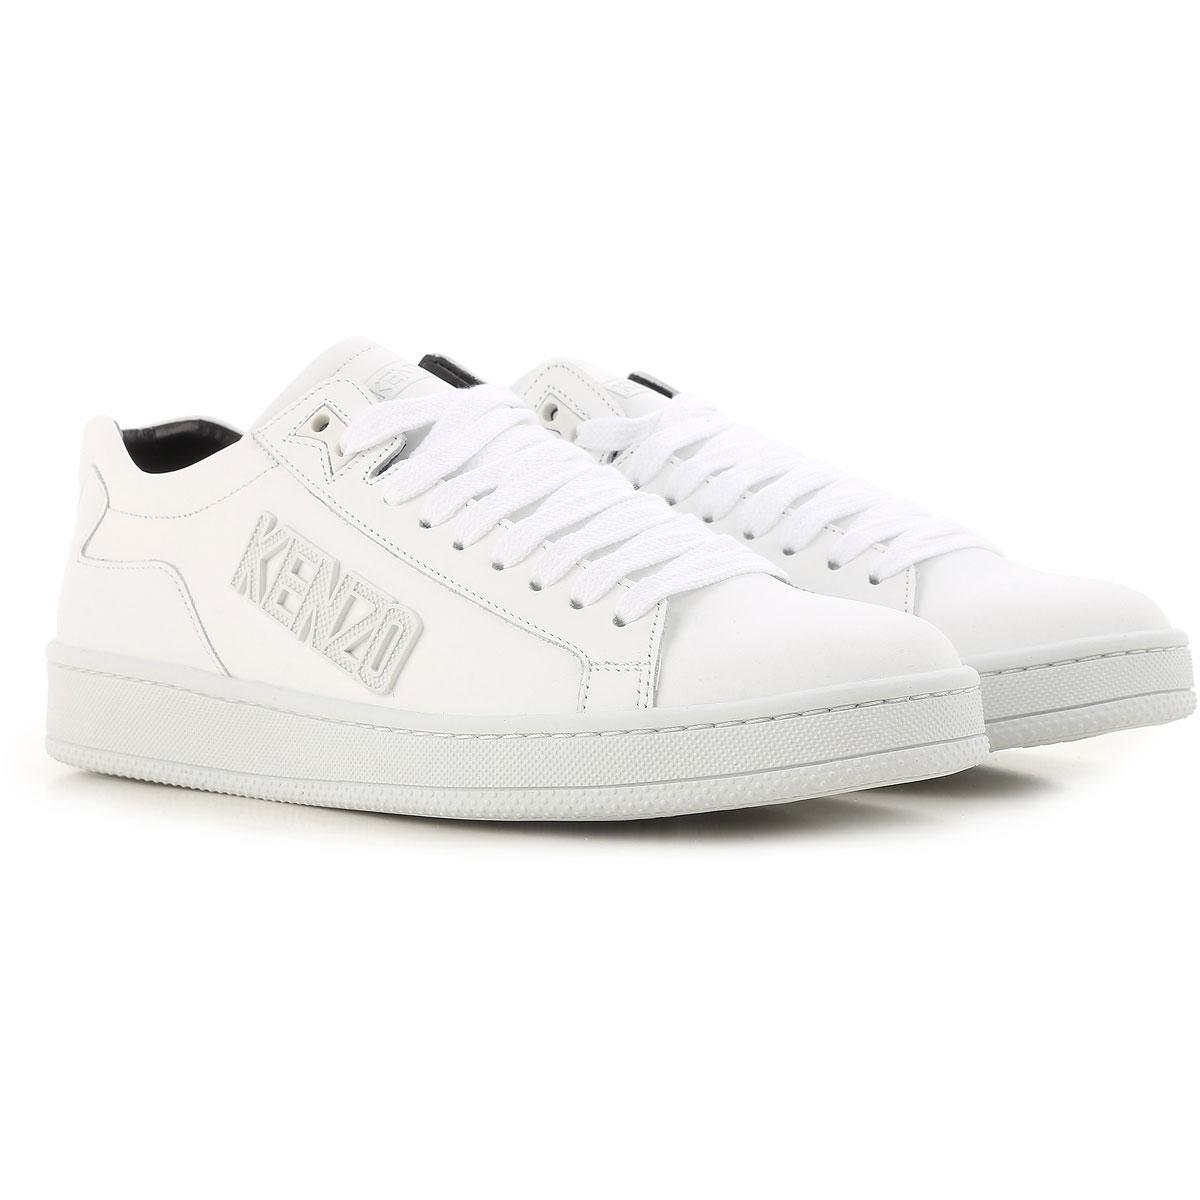 Kenzo Sneakers White Online Sale, UP TO 60% OFF